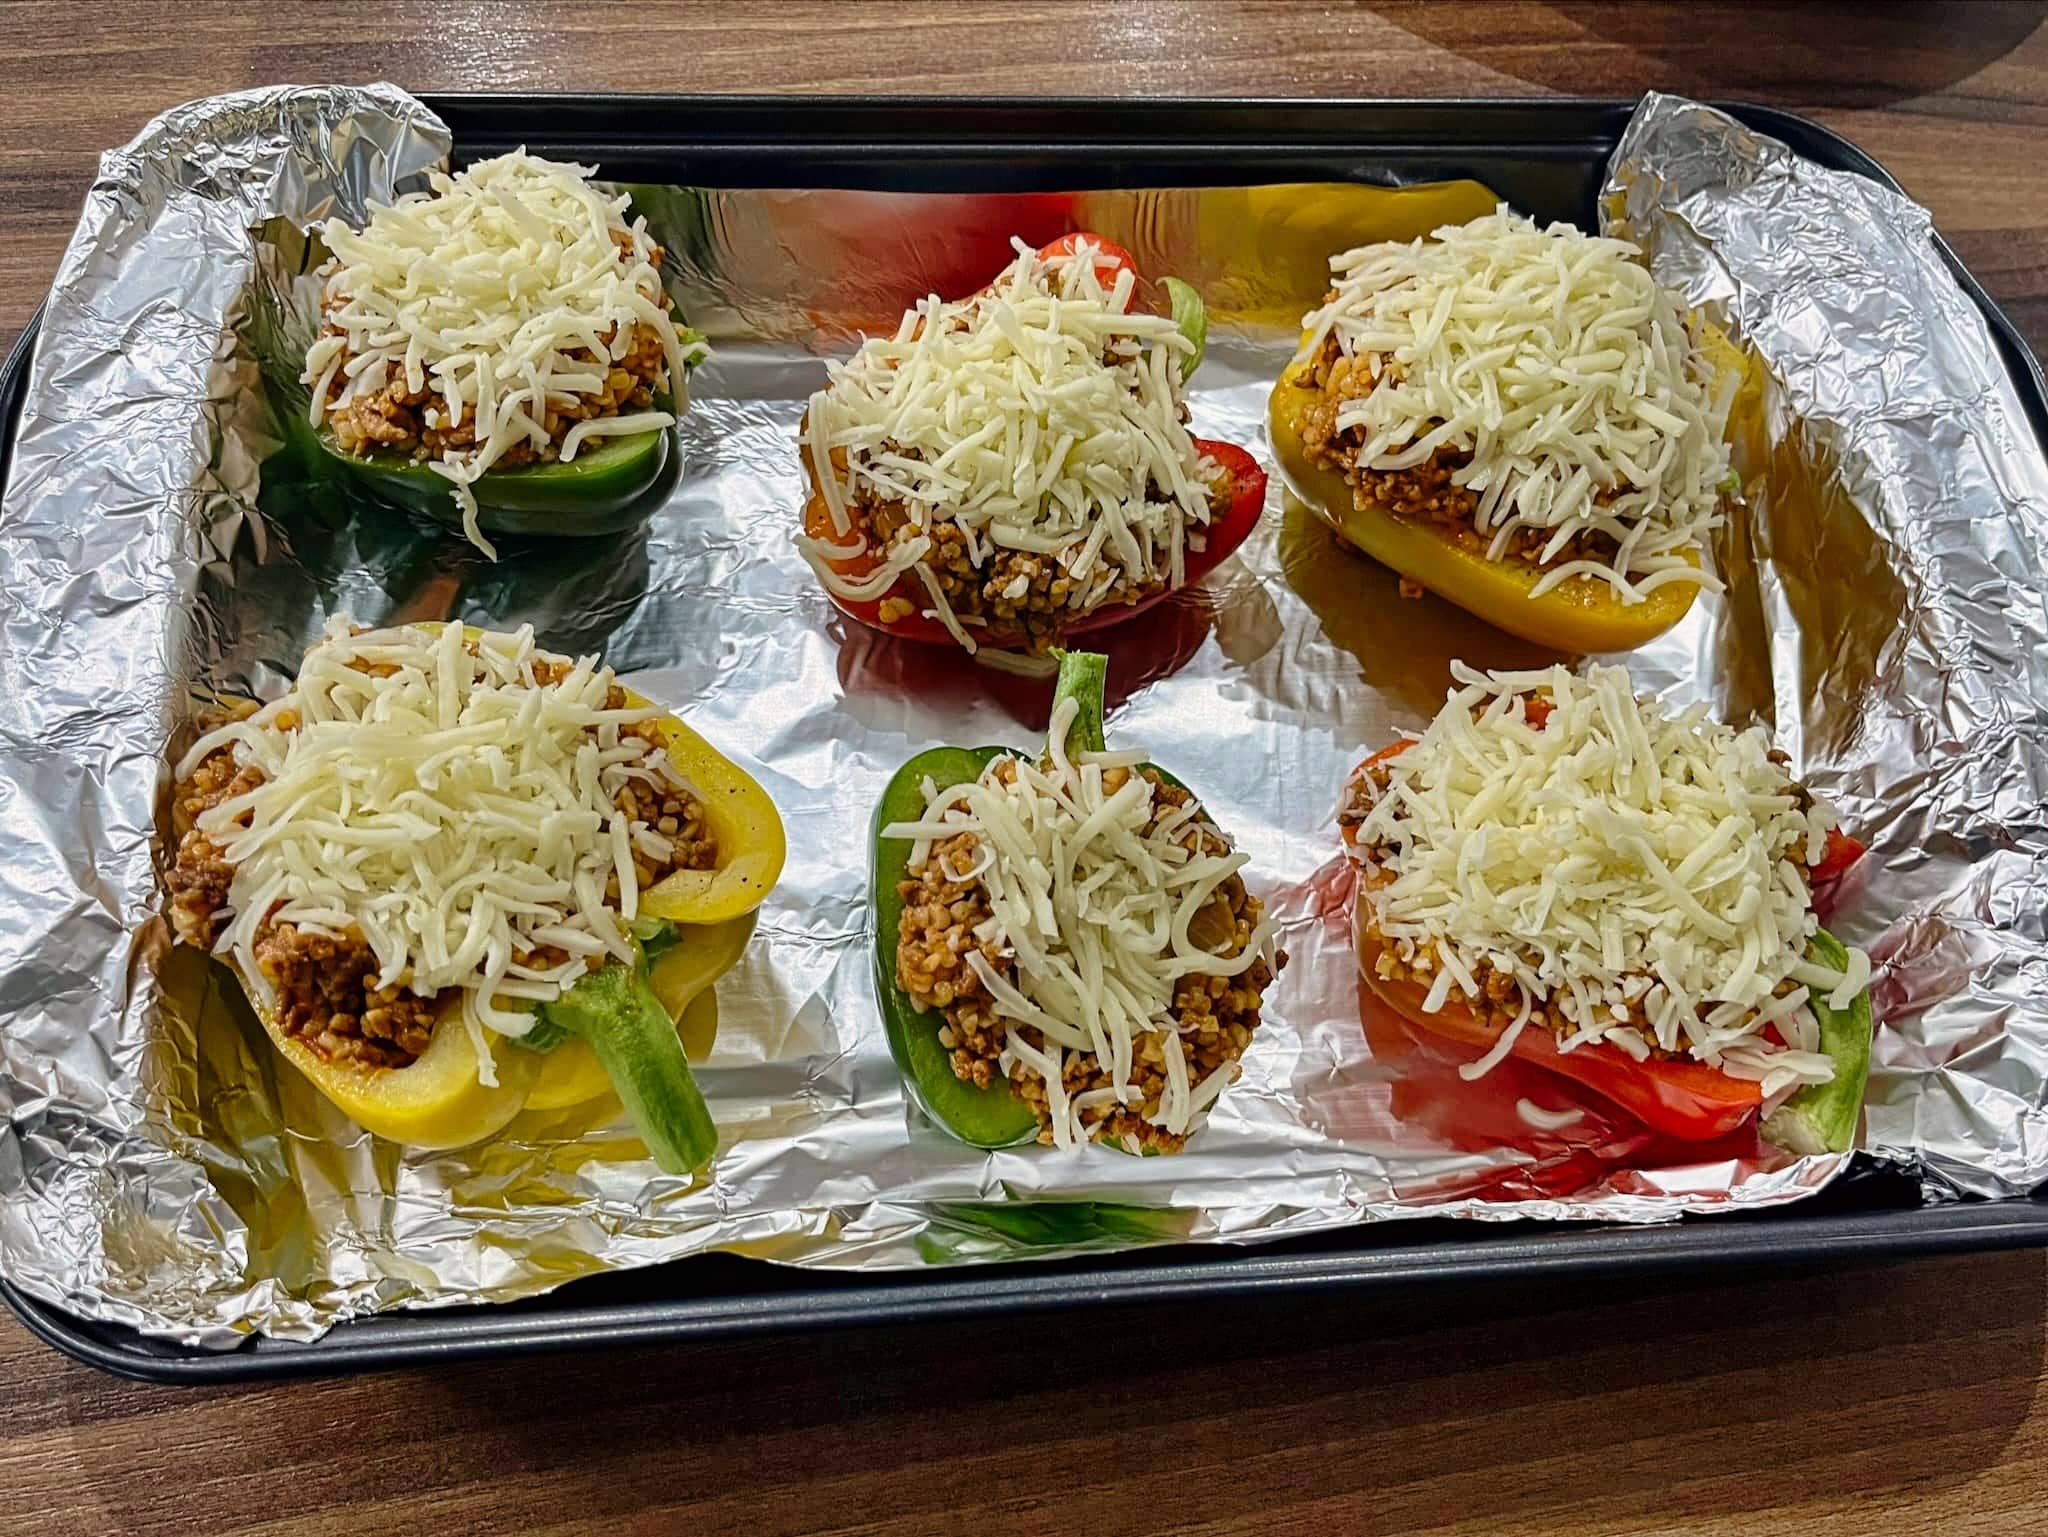 Peppers stuffed with filling and covered with mozzarella cheese